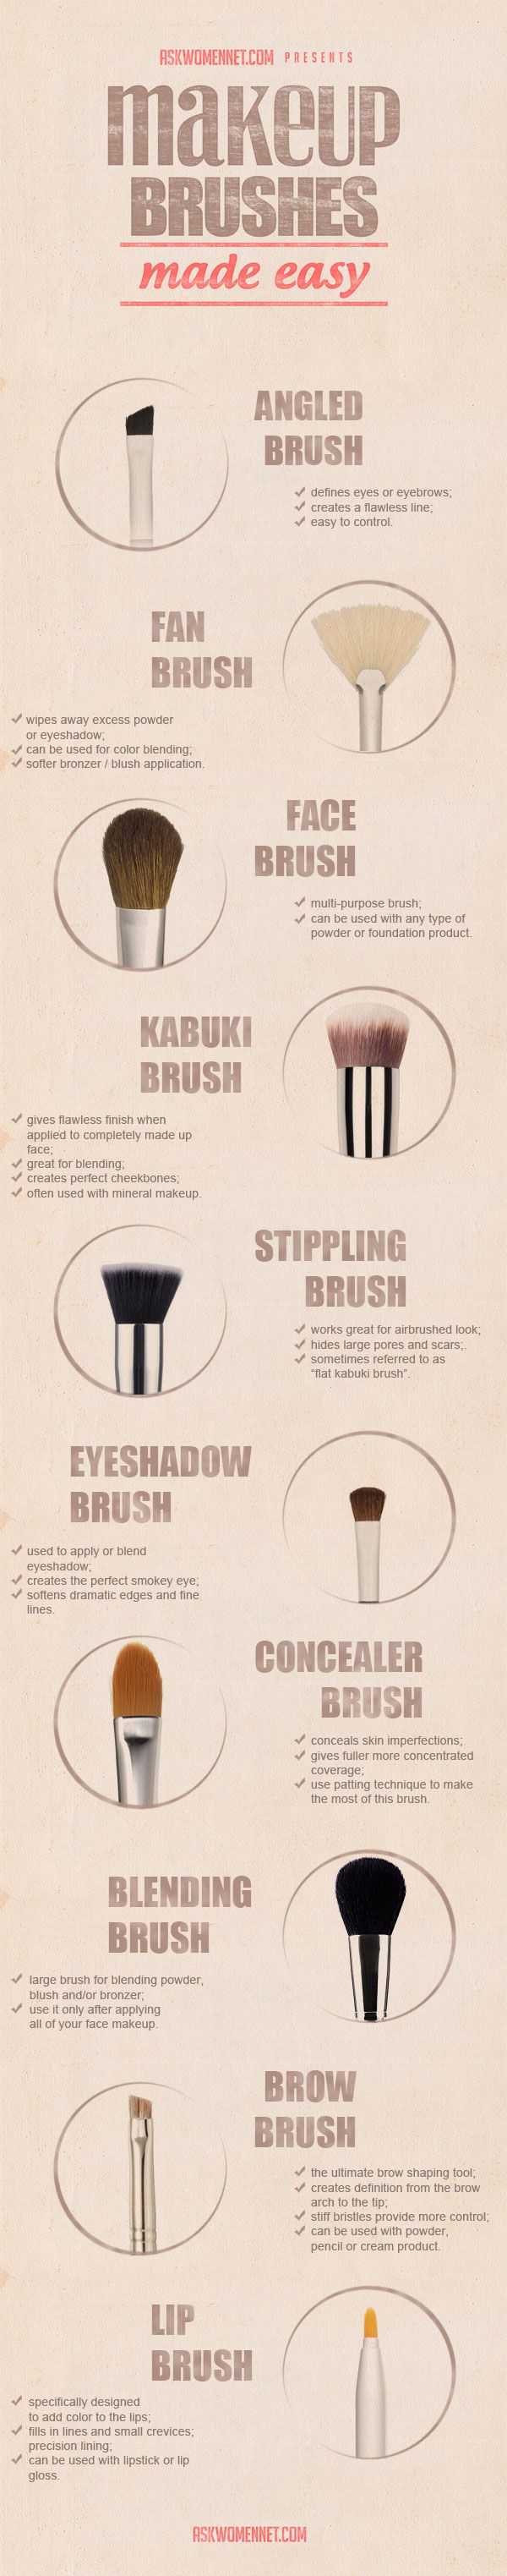 Makeup Brushes Made Easy